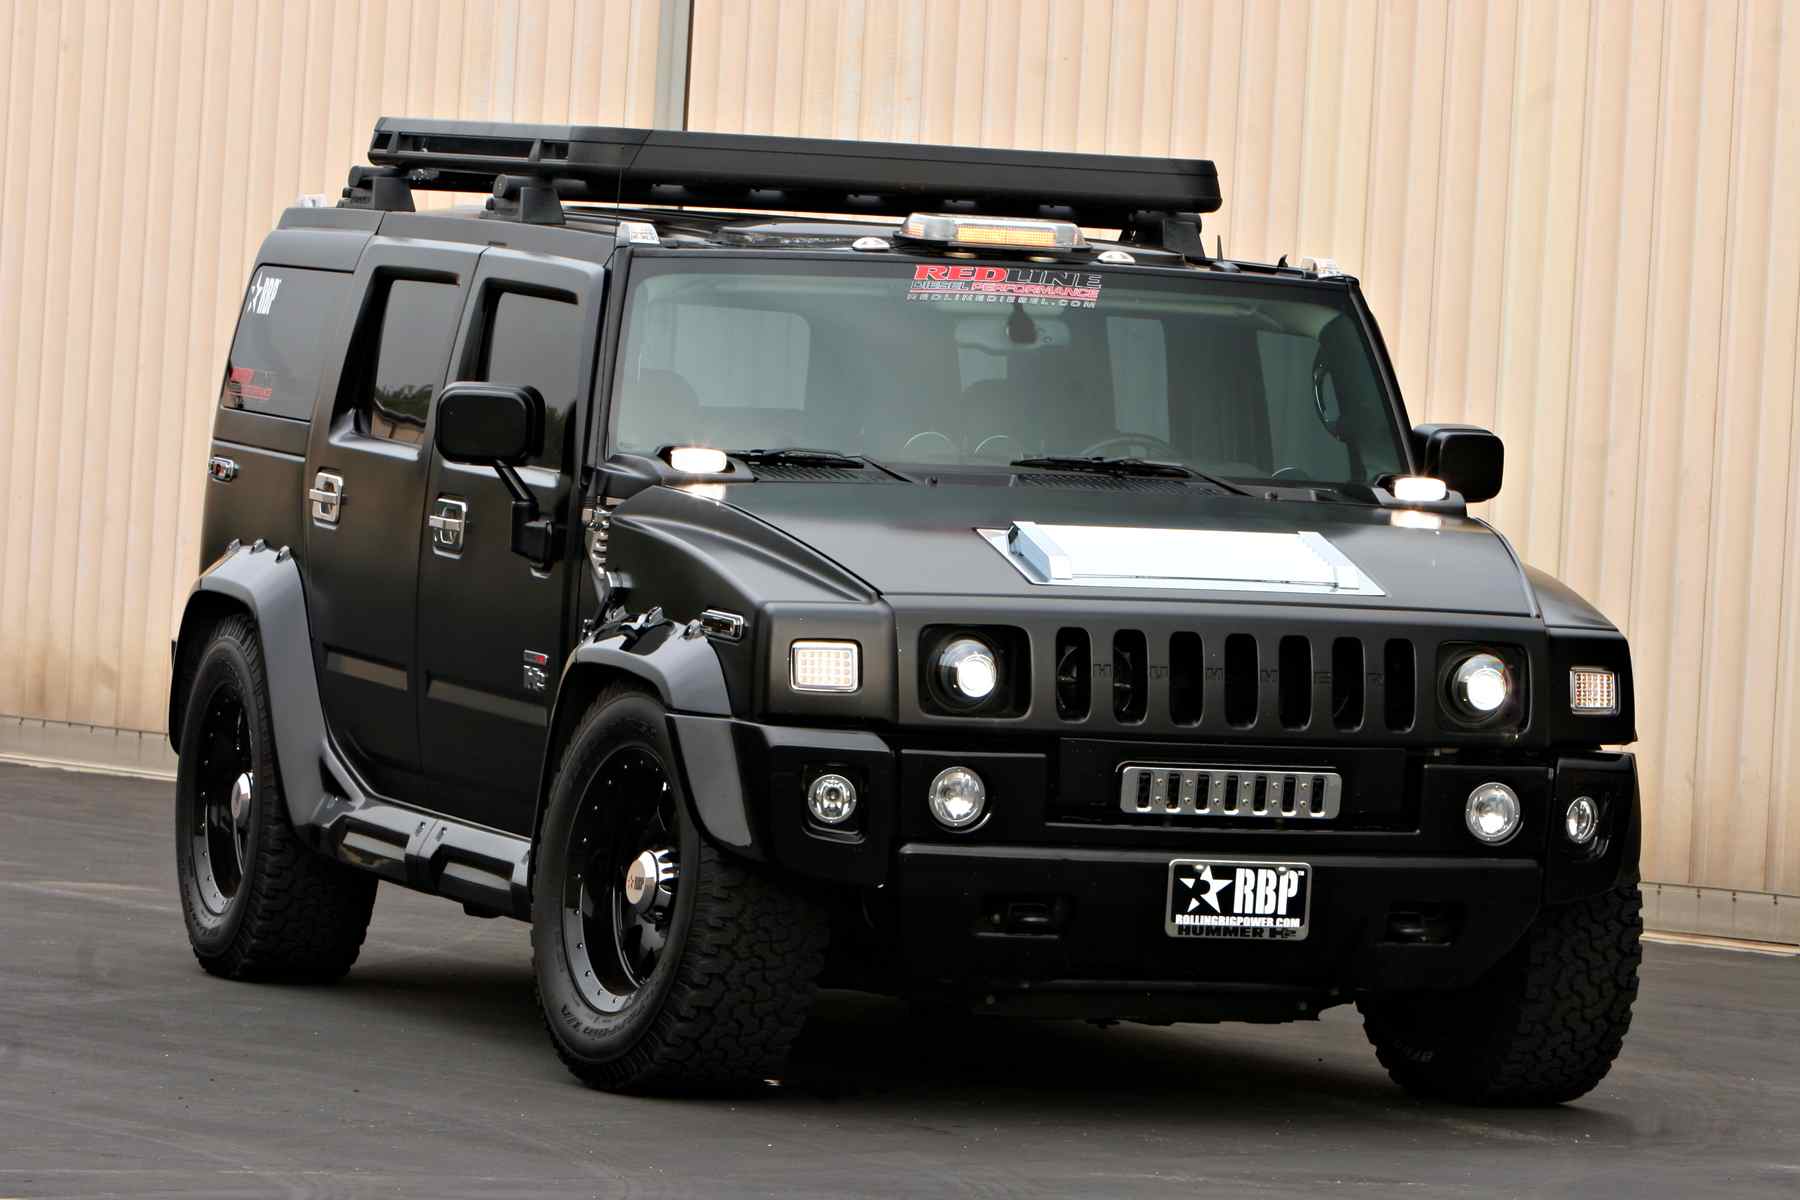 Hummer received many good reviews of car owners for their consumer qualities